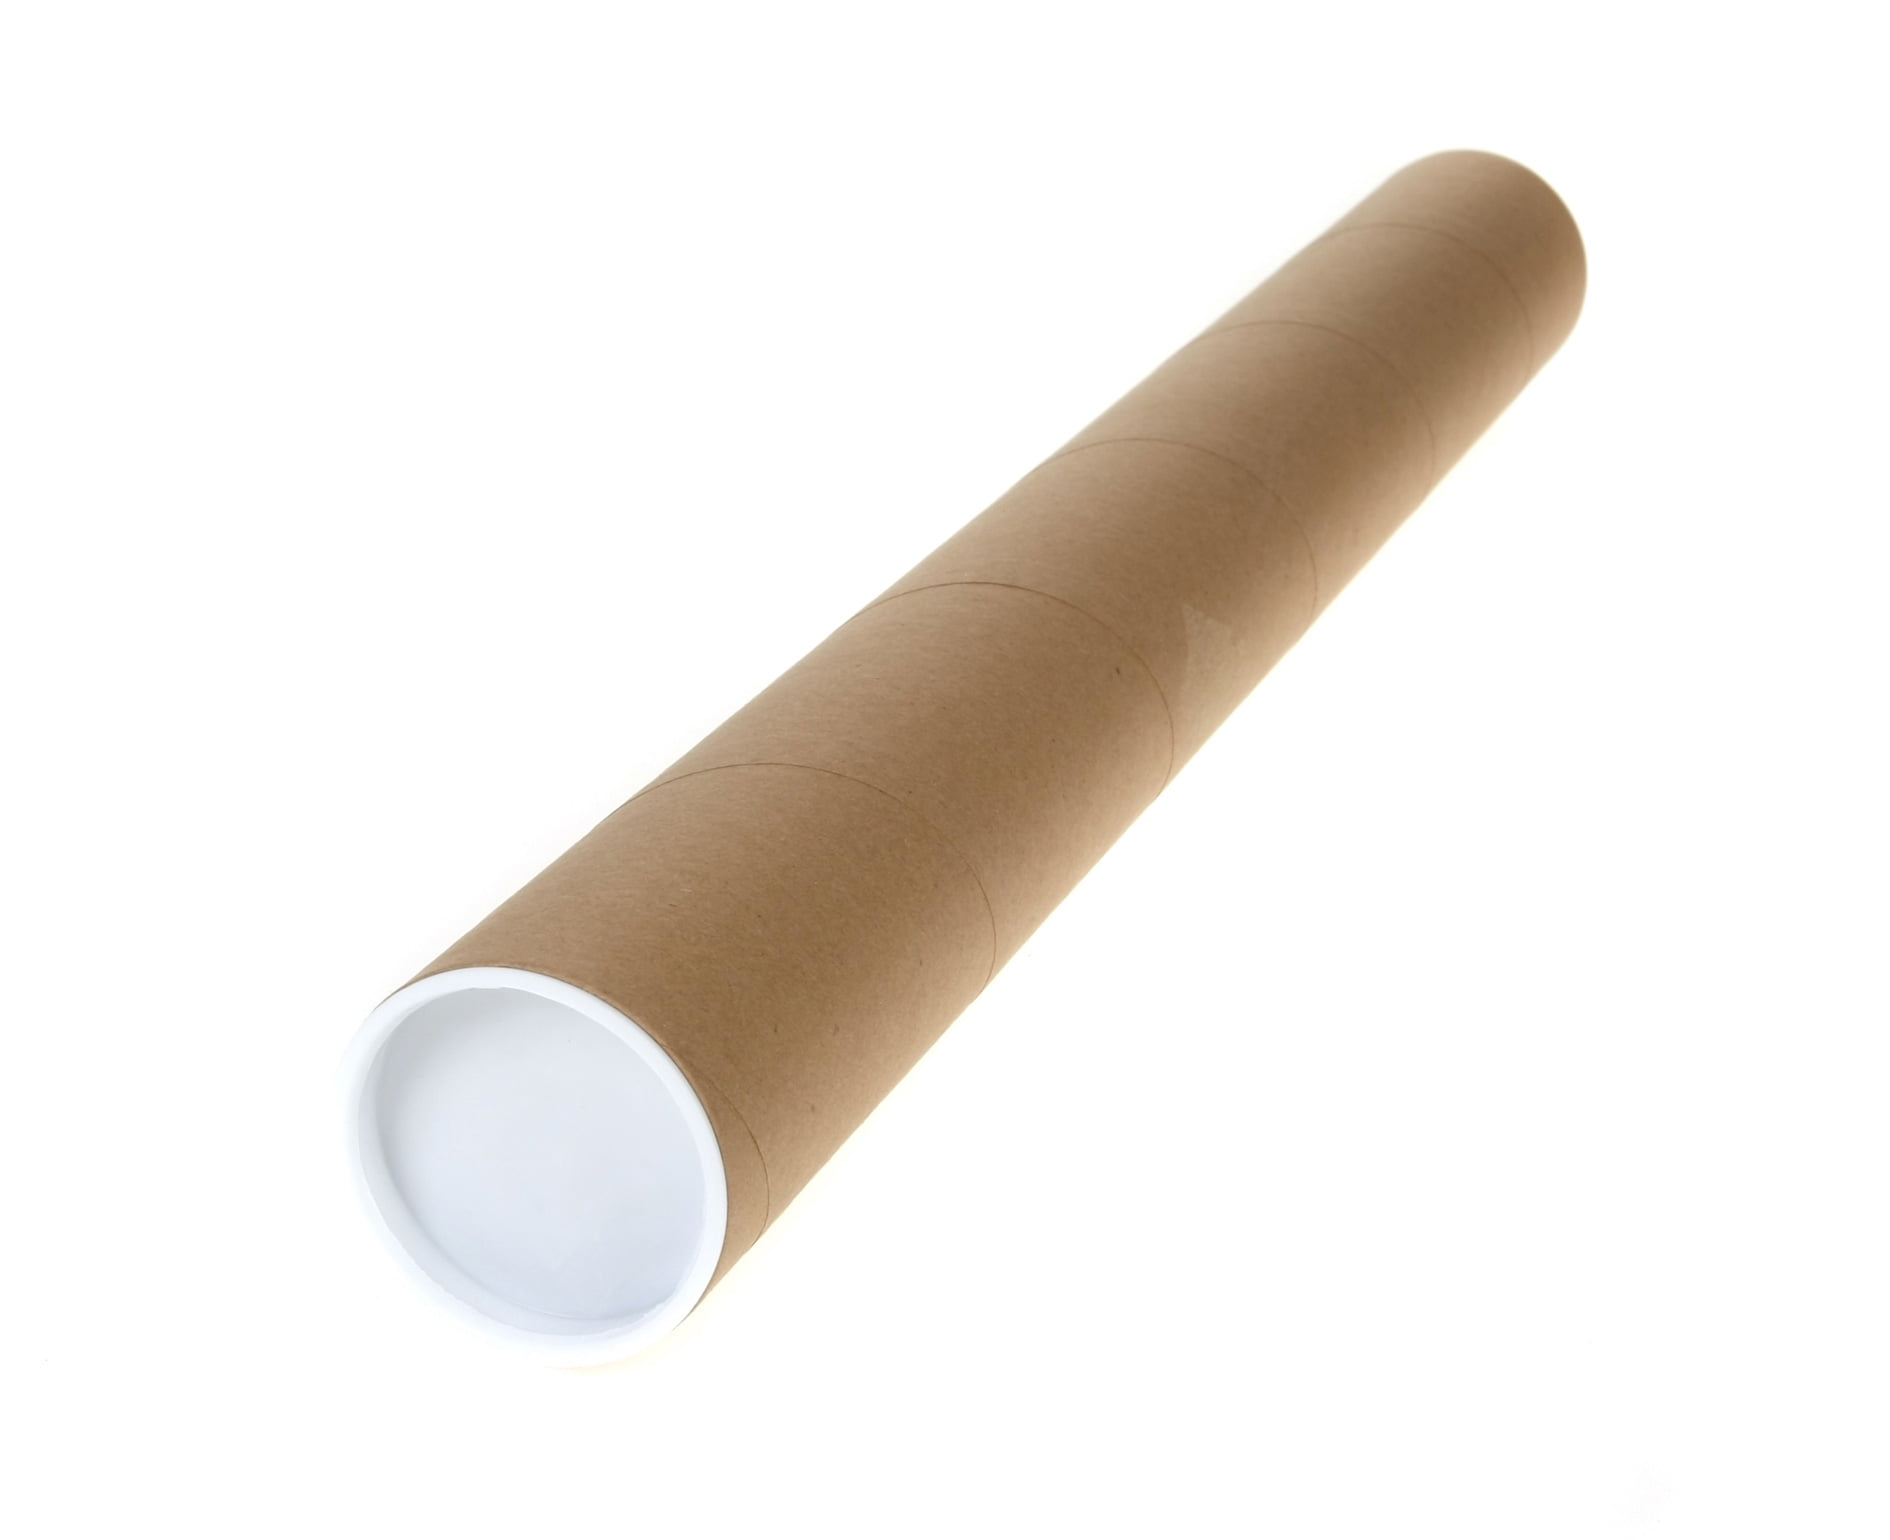 2x36 Kraft Crimped End Tubes shipping tubes, mailing tubes, shipping  supplies, bubble wrap, boxes, bubble mailers